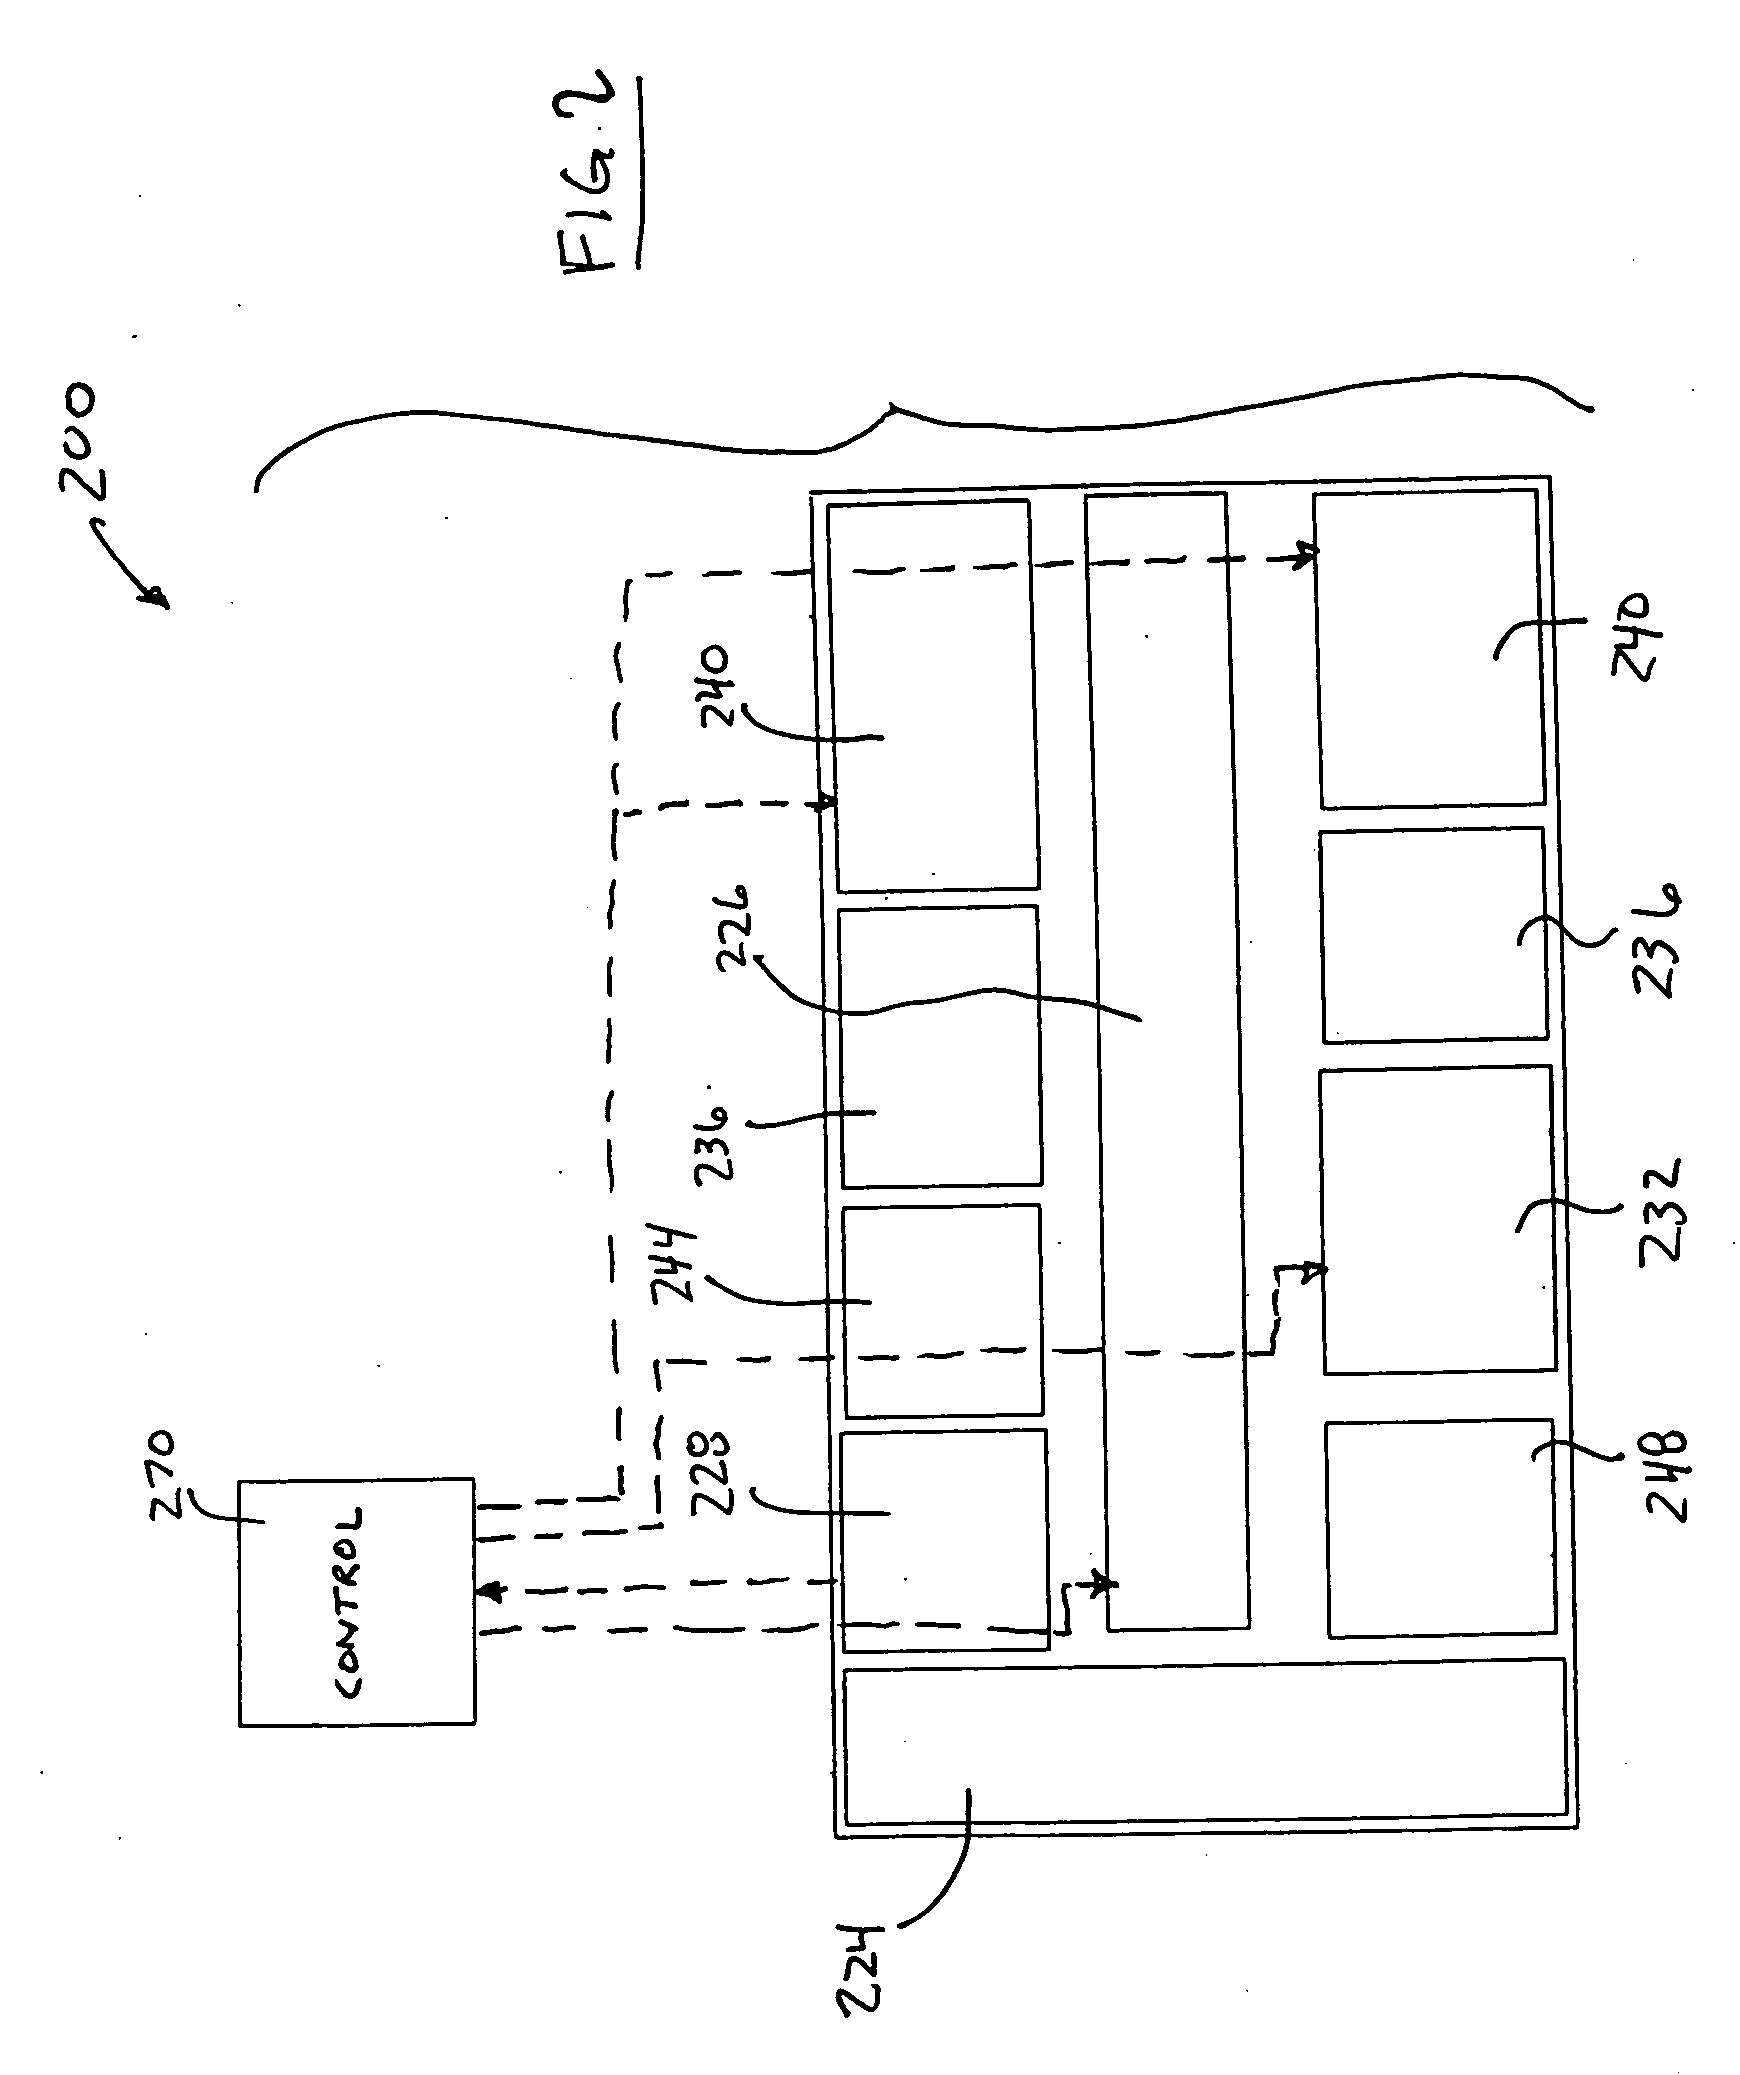 Apparatus and method for processing a microelectronic workpiece using metrology